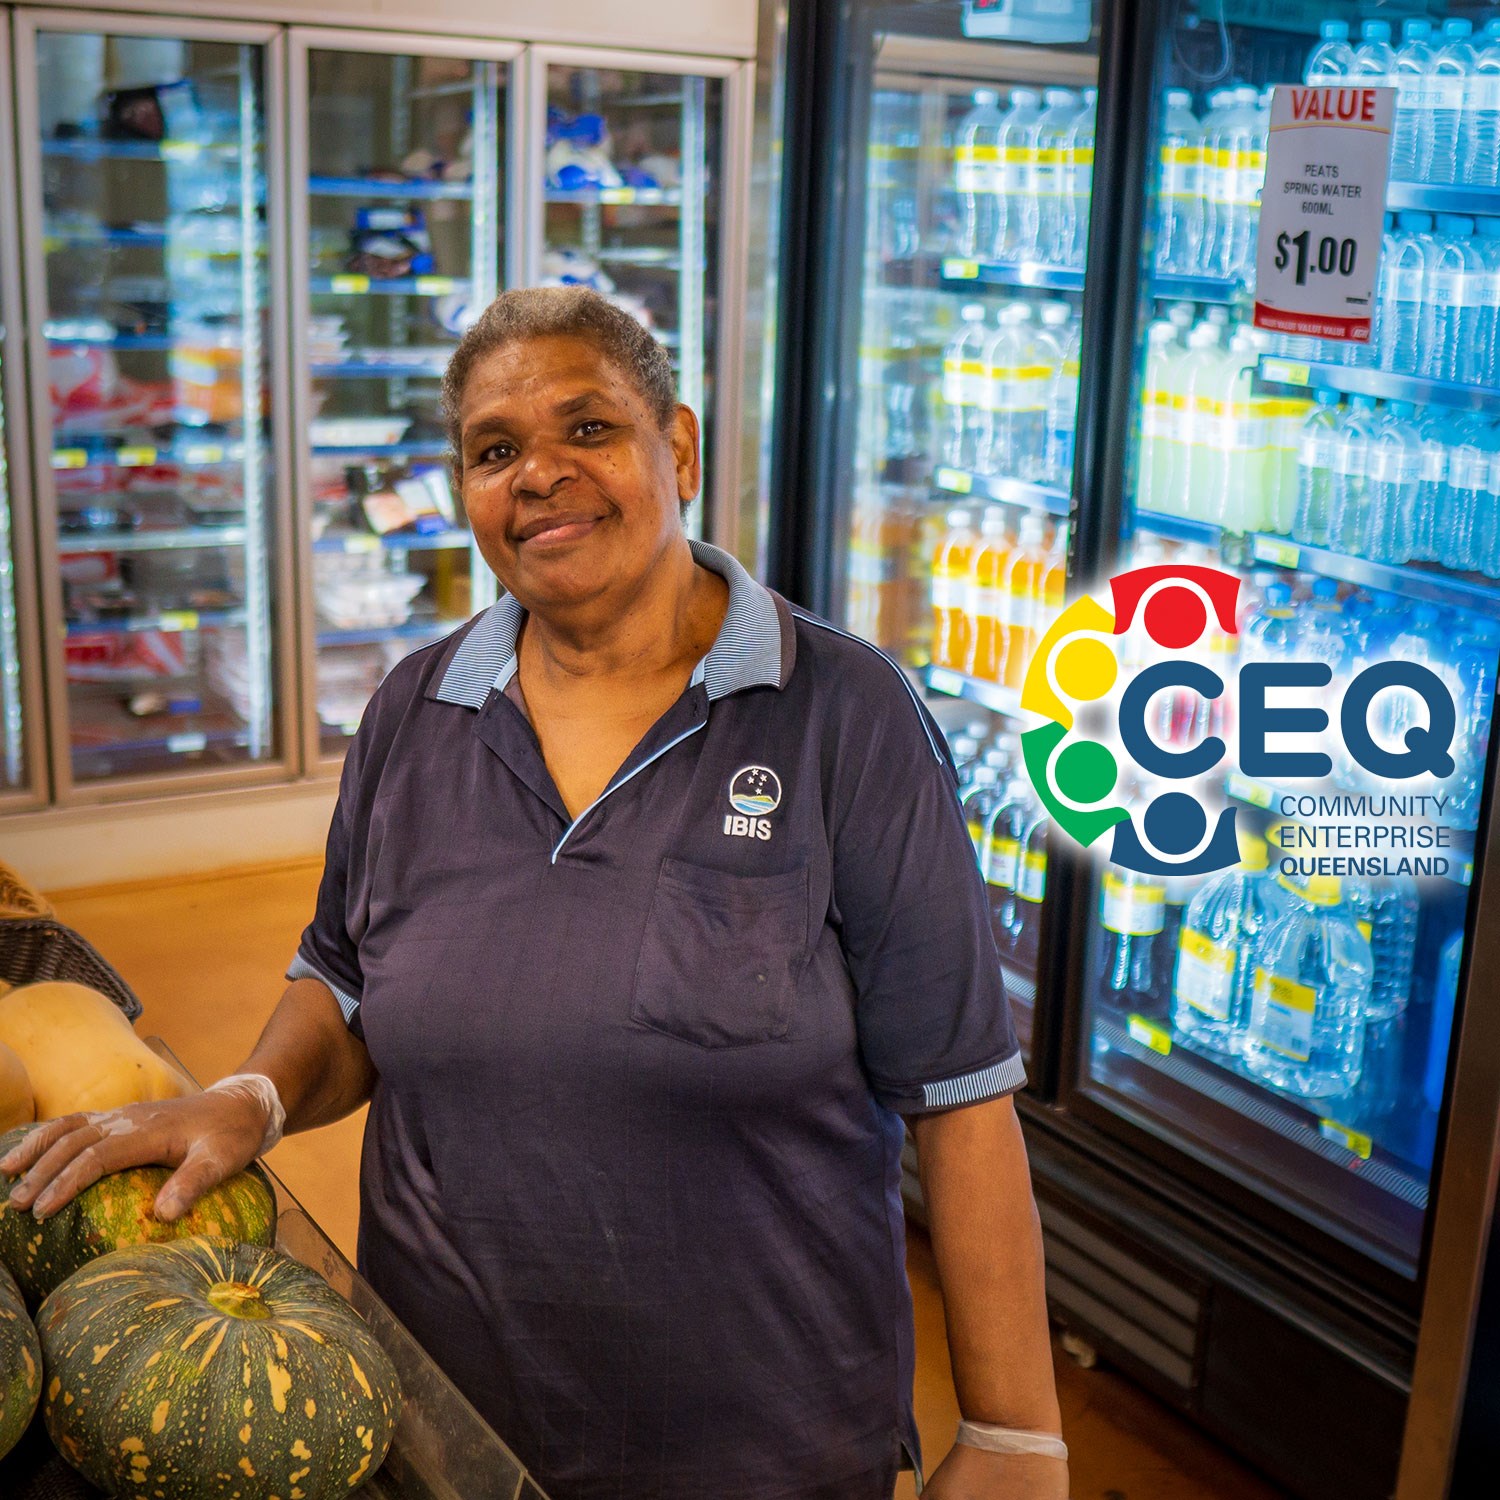 Coca-Cola Amatil and Community Enterprise Queensland renew partnership, continuing to drive continued wellbeing in communities